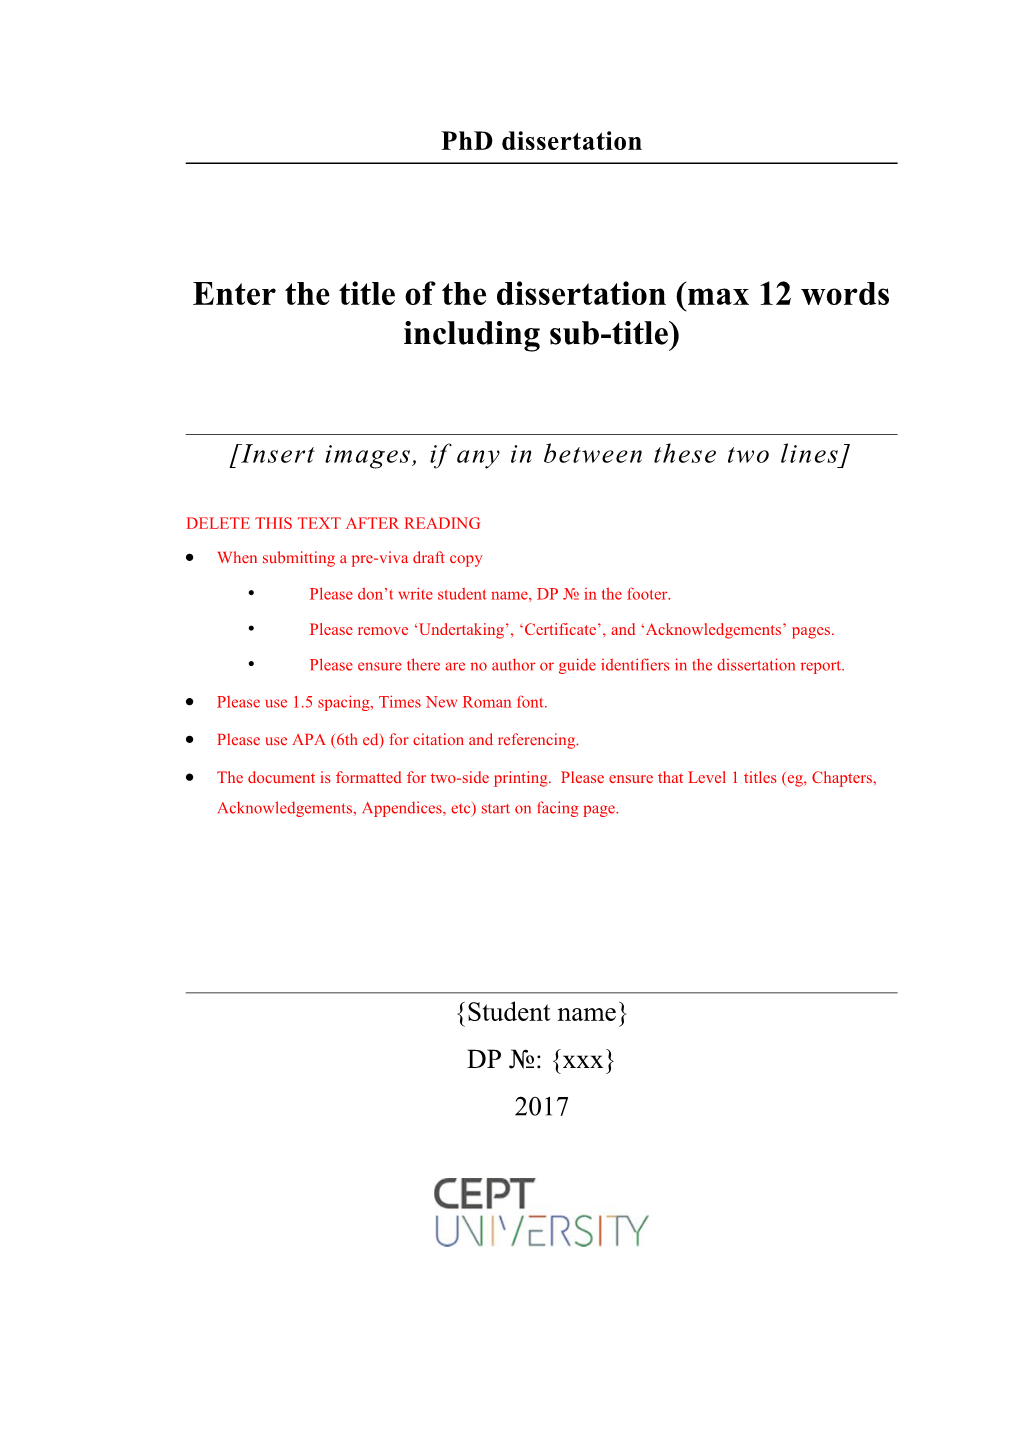 Enter the Title of the Dissertation (Max 12 Words Including Sub-Title)